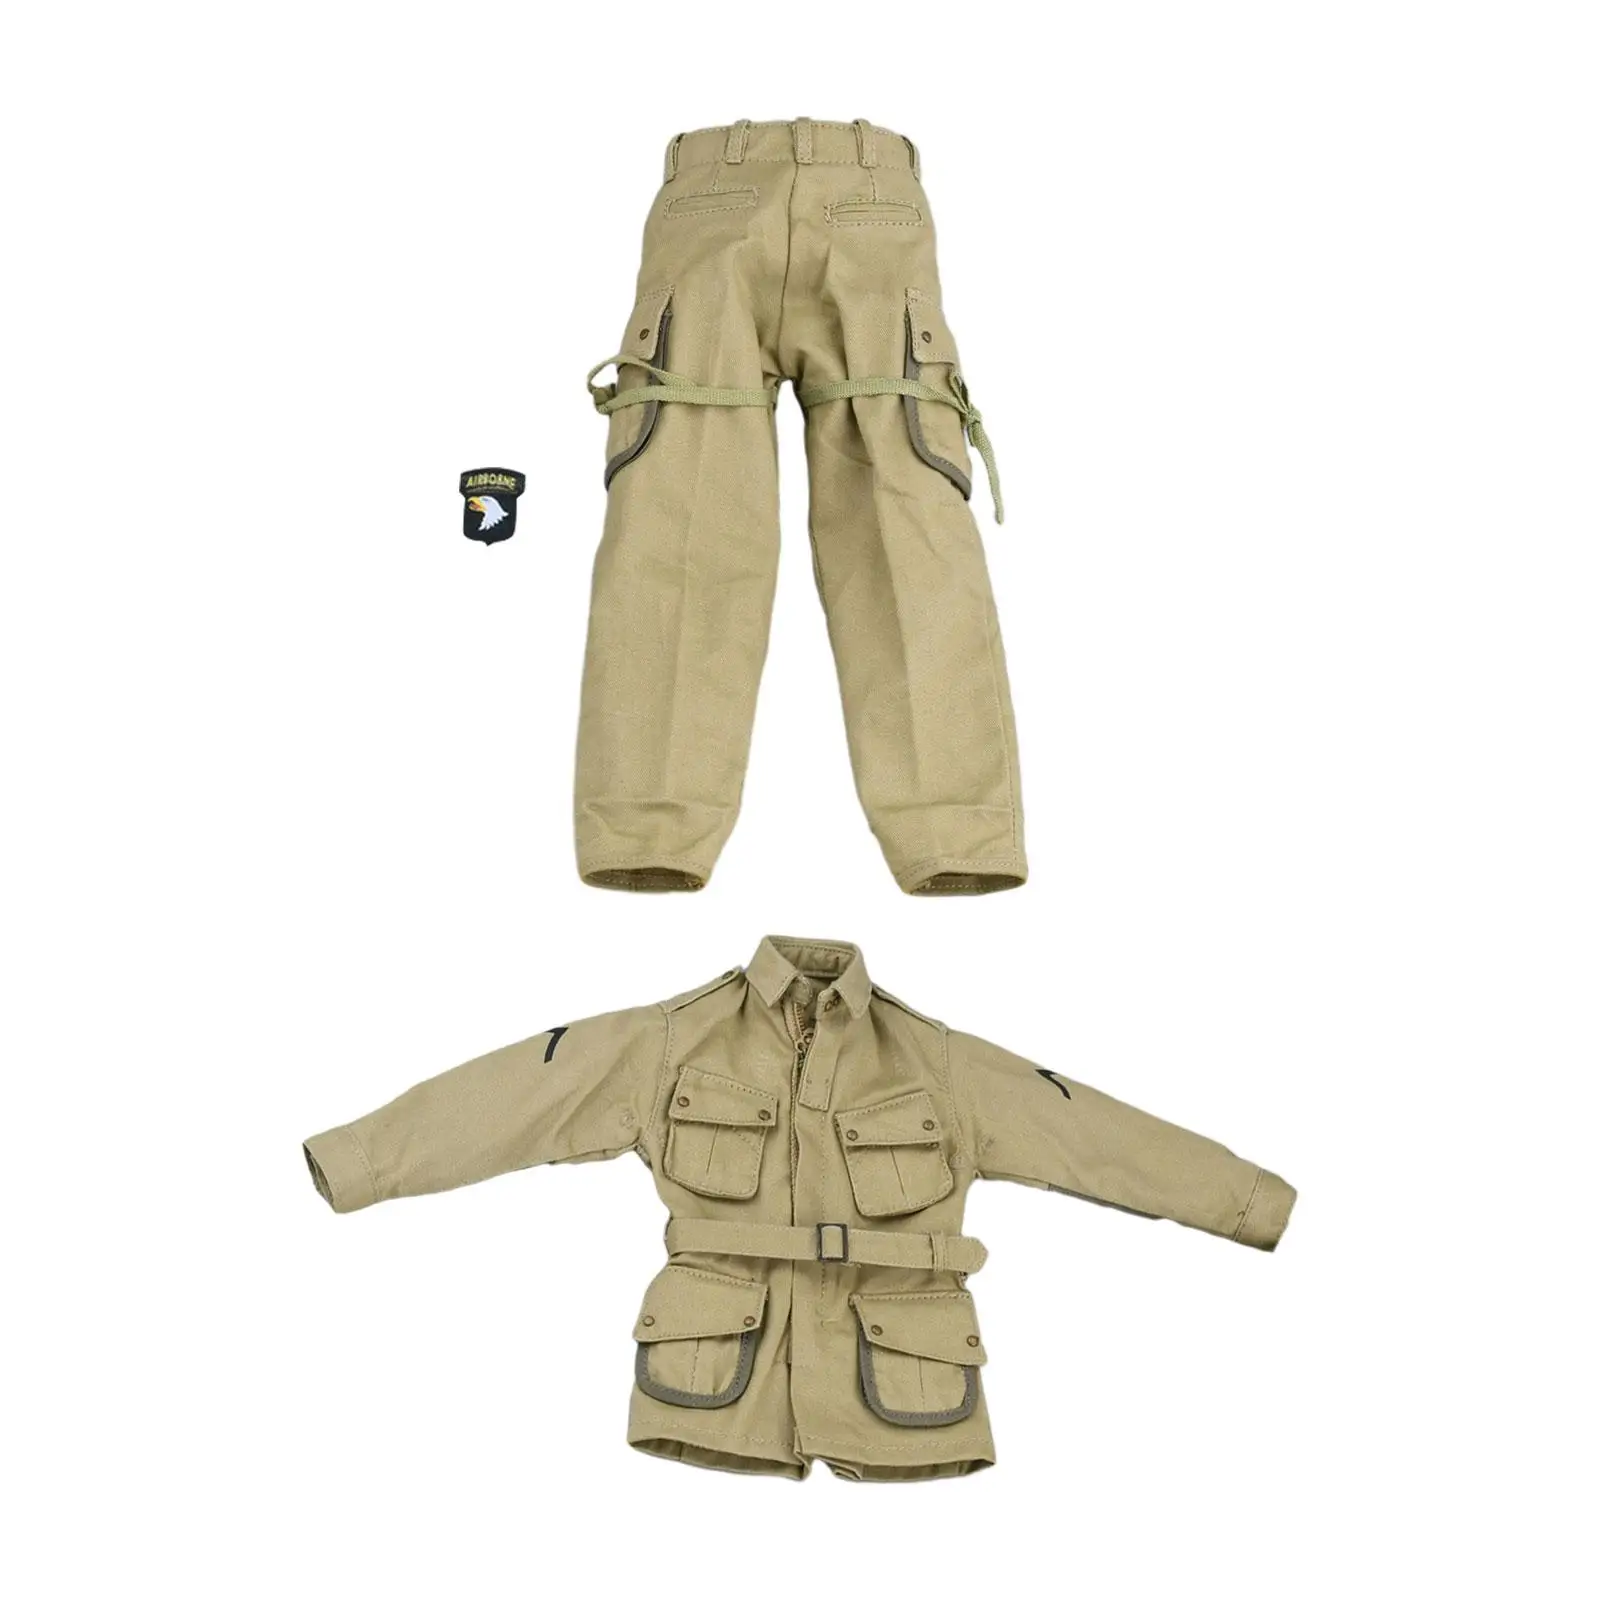 1/6 Scale Clothes Mini Coat Pant Cosplay Outfit, Retro Fashion Uniform Model for